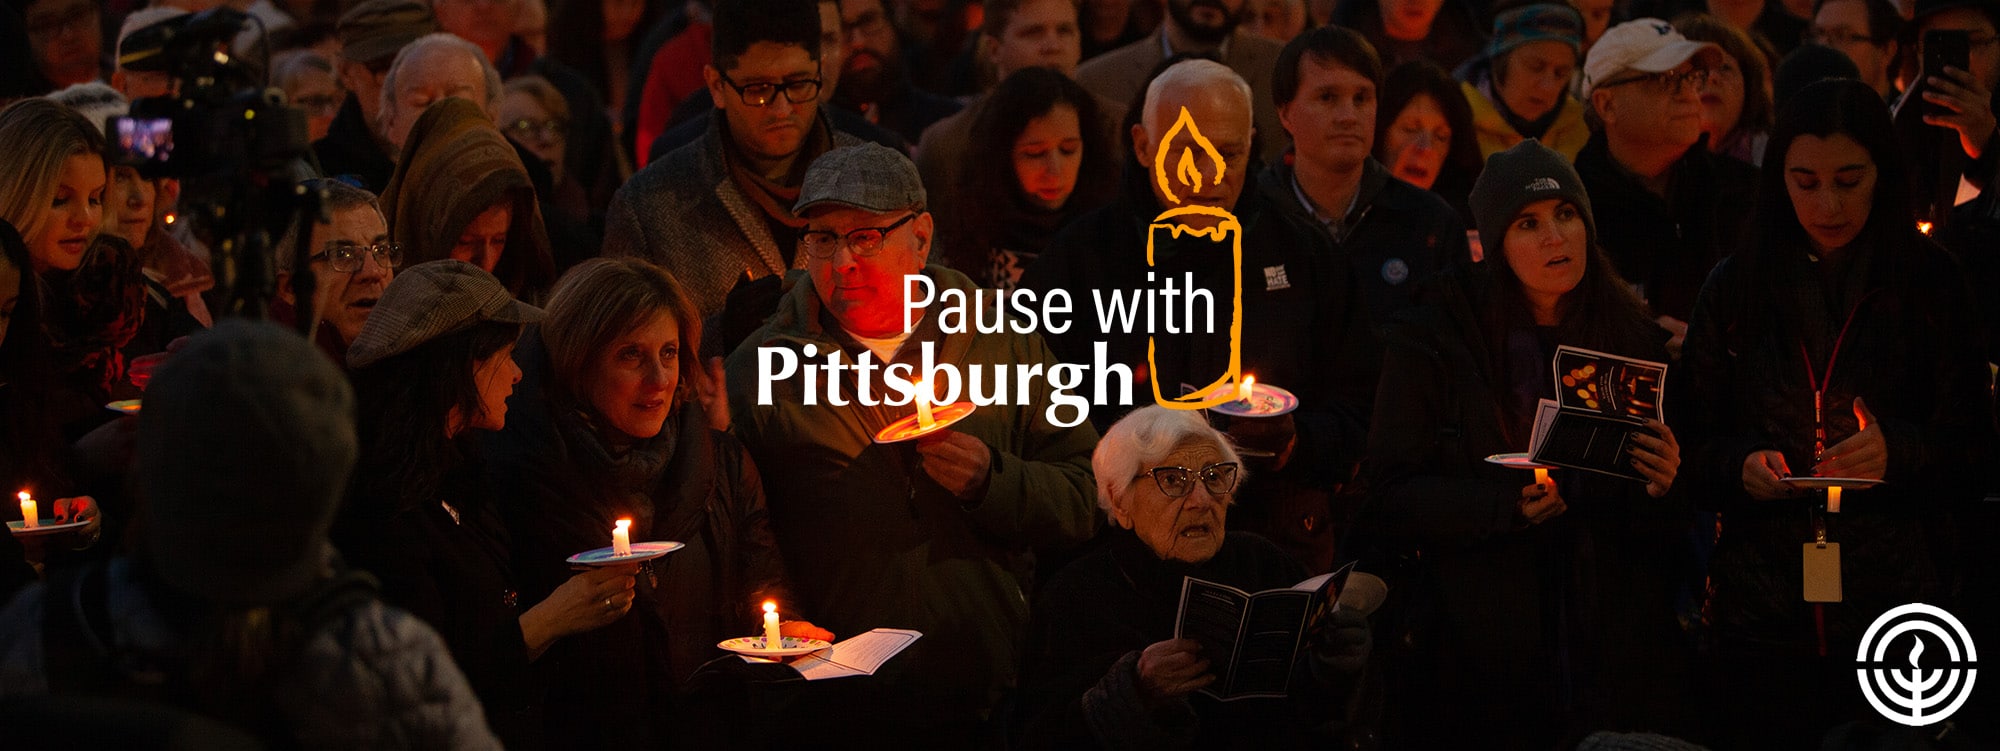 Pause-with-Pittsburgh-Web-Banner-Logo-in-center_2000x751